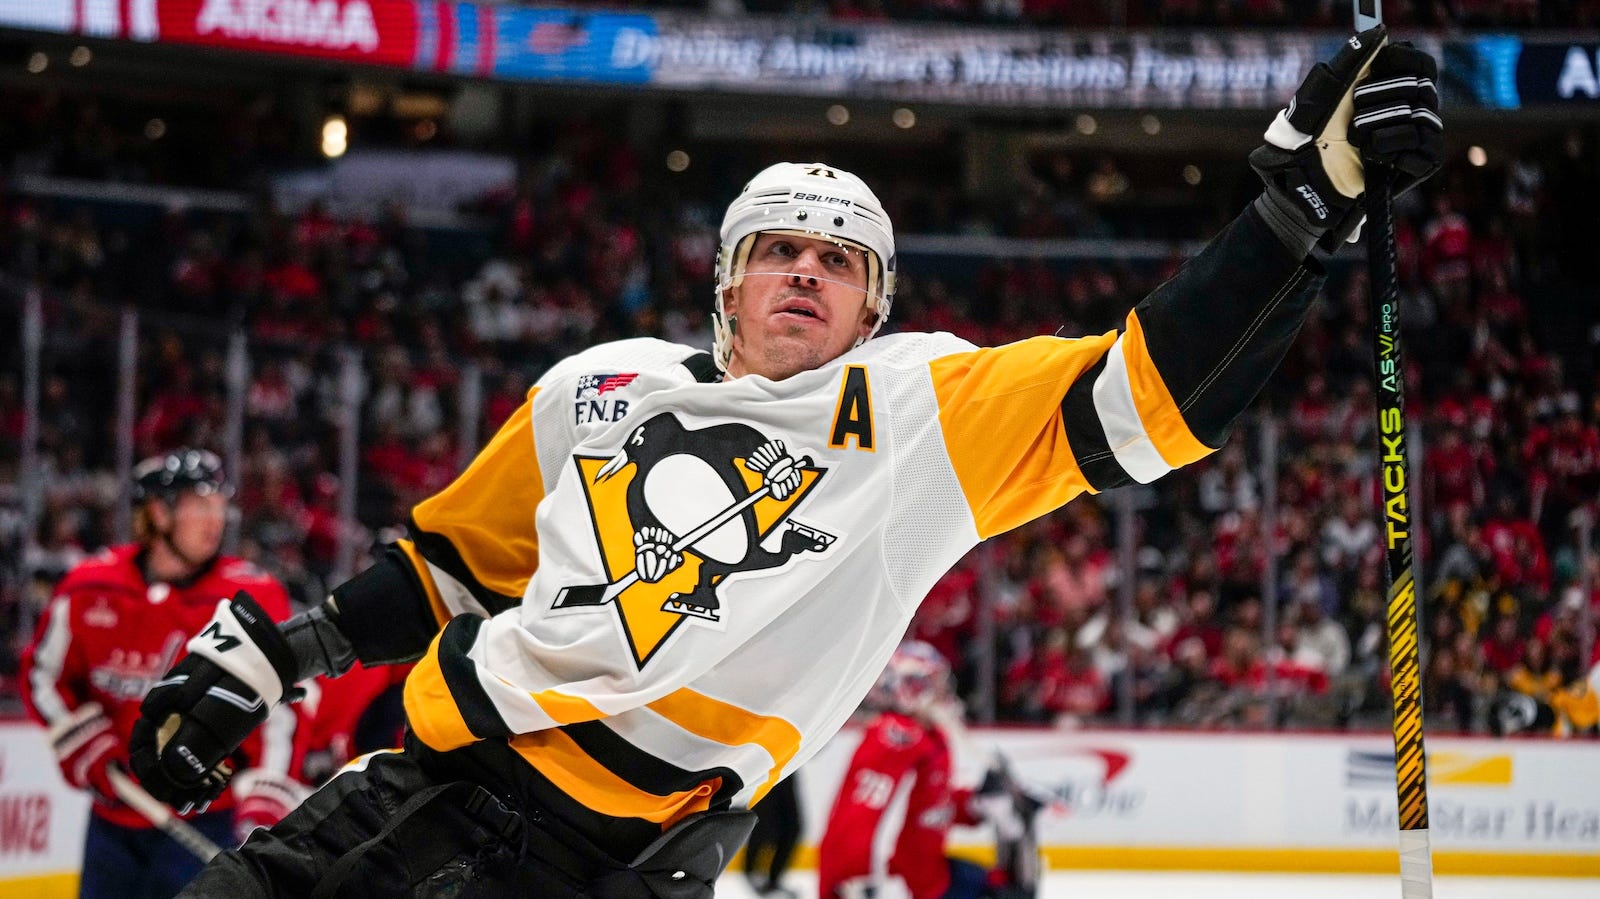 Crosby, Malkin, and Letang to join exclusive list in sports